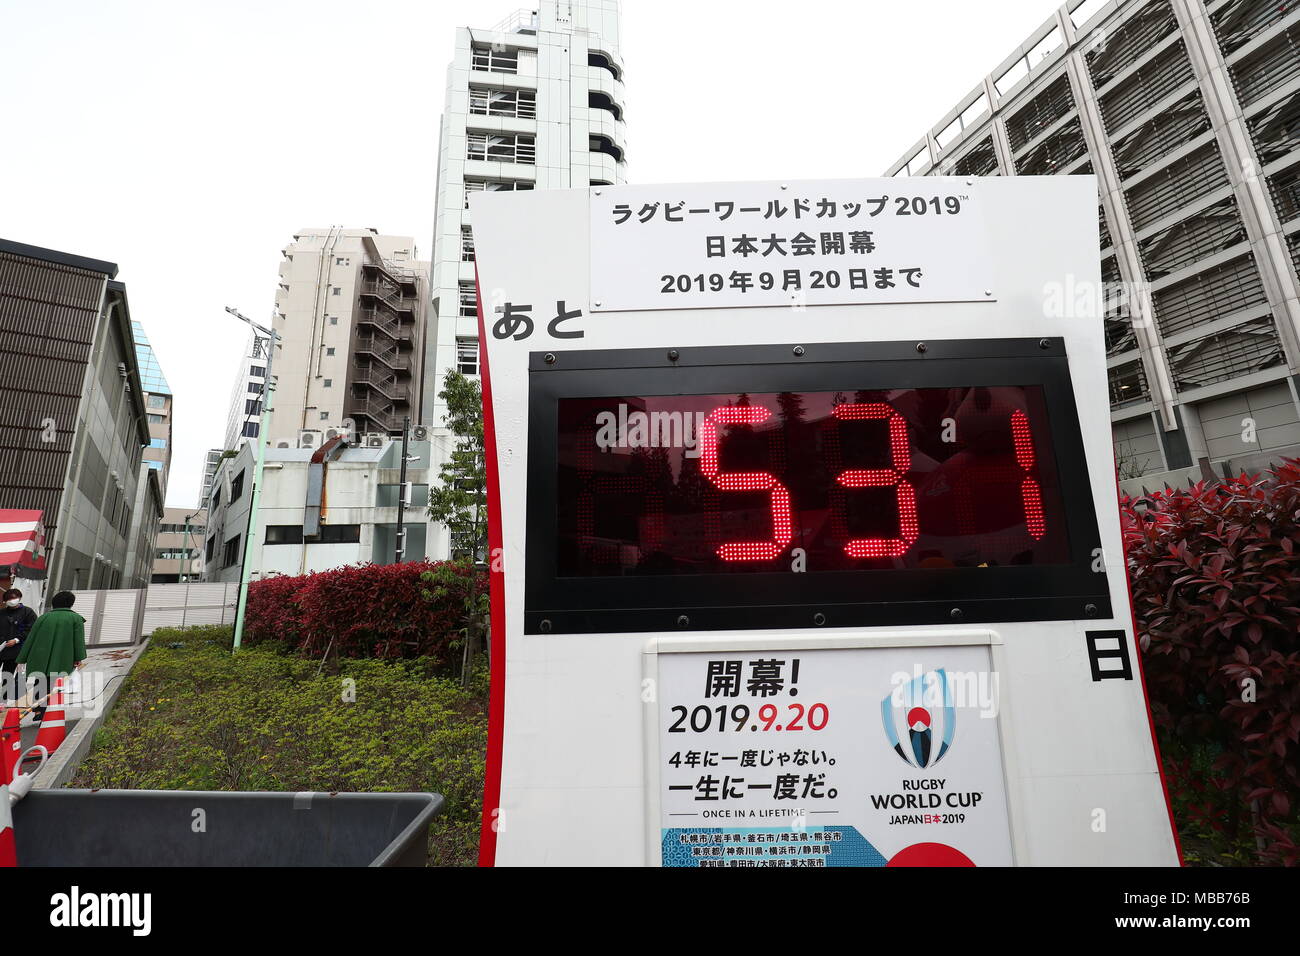 Rugby World Cup 2019 countdown clock during the Super Rugby match between Sunwolves 29-50 Waratahs at Prince Chichibu Memorial Stadium in Tokyo, Japan on April 7, 2018. Credit: Kenzaburo Matsuoka/AFLO/Alamy Live News Stock Photo